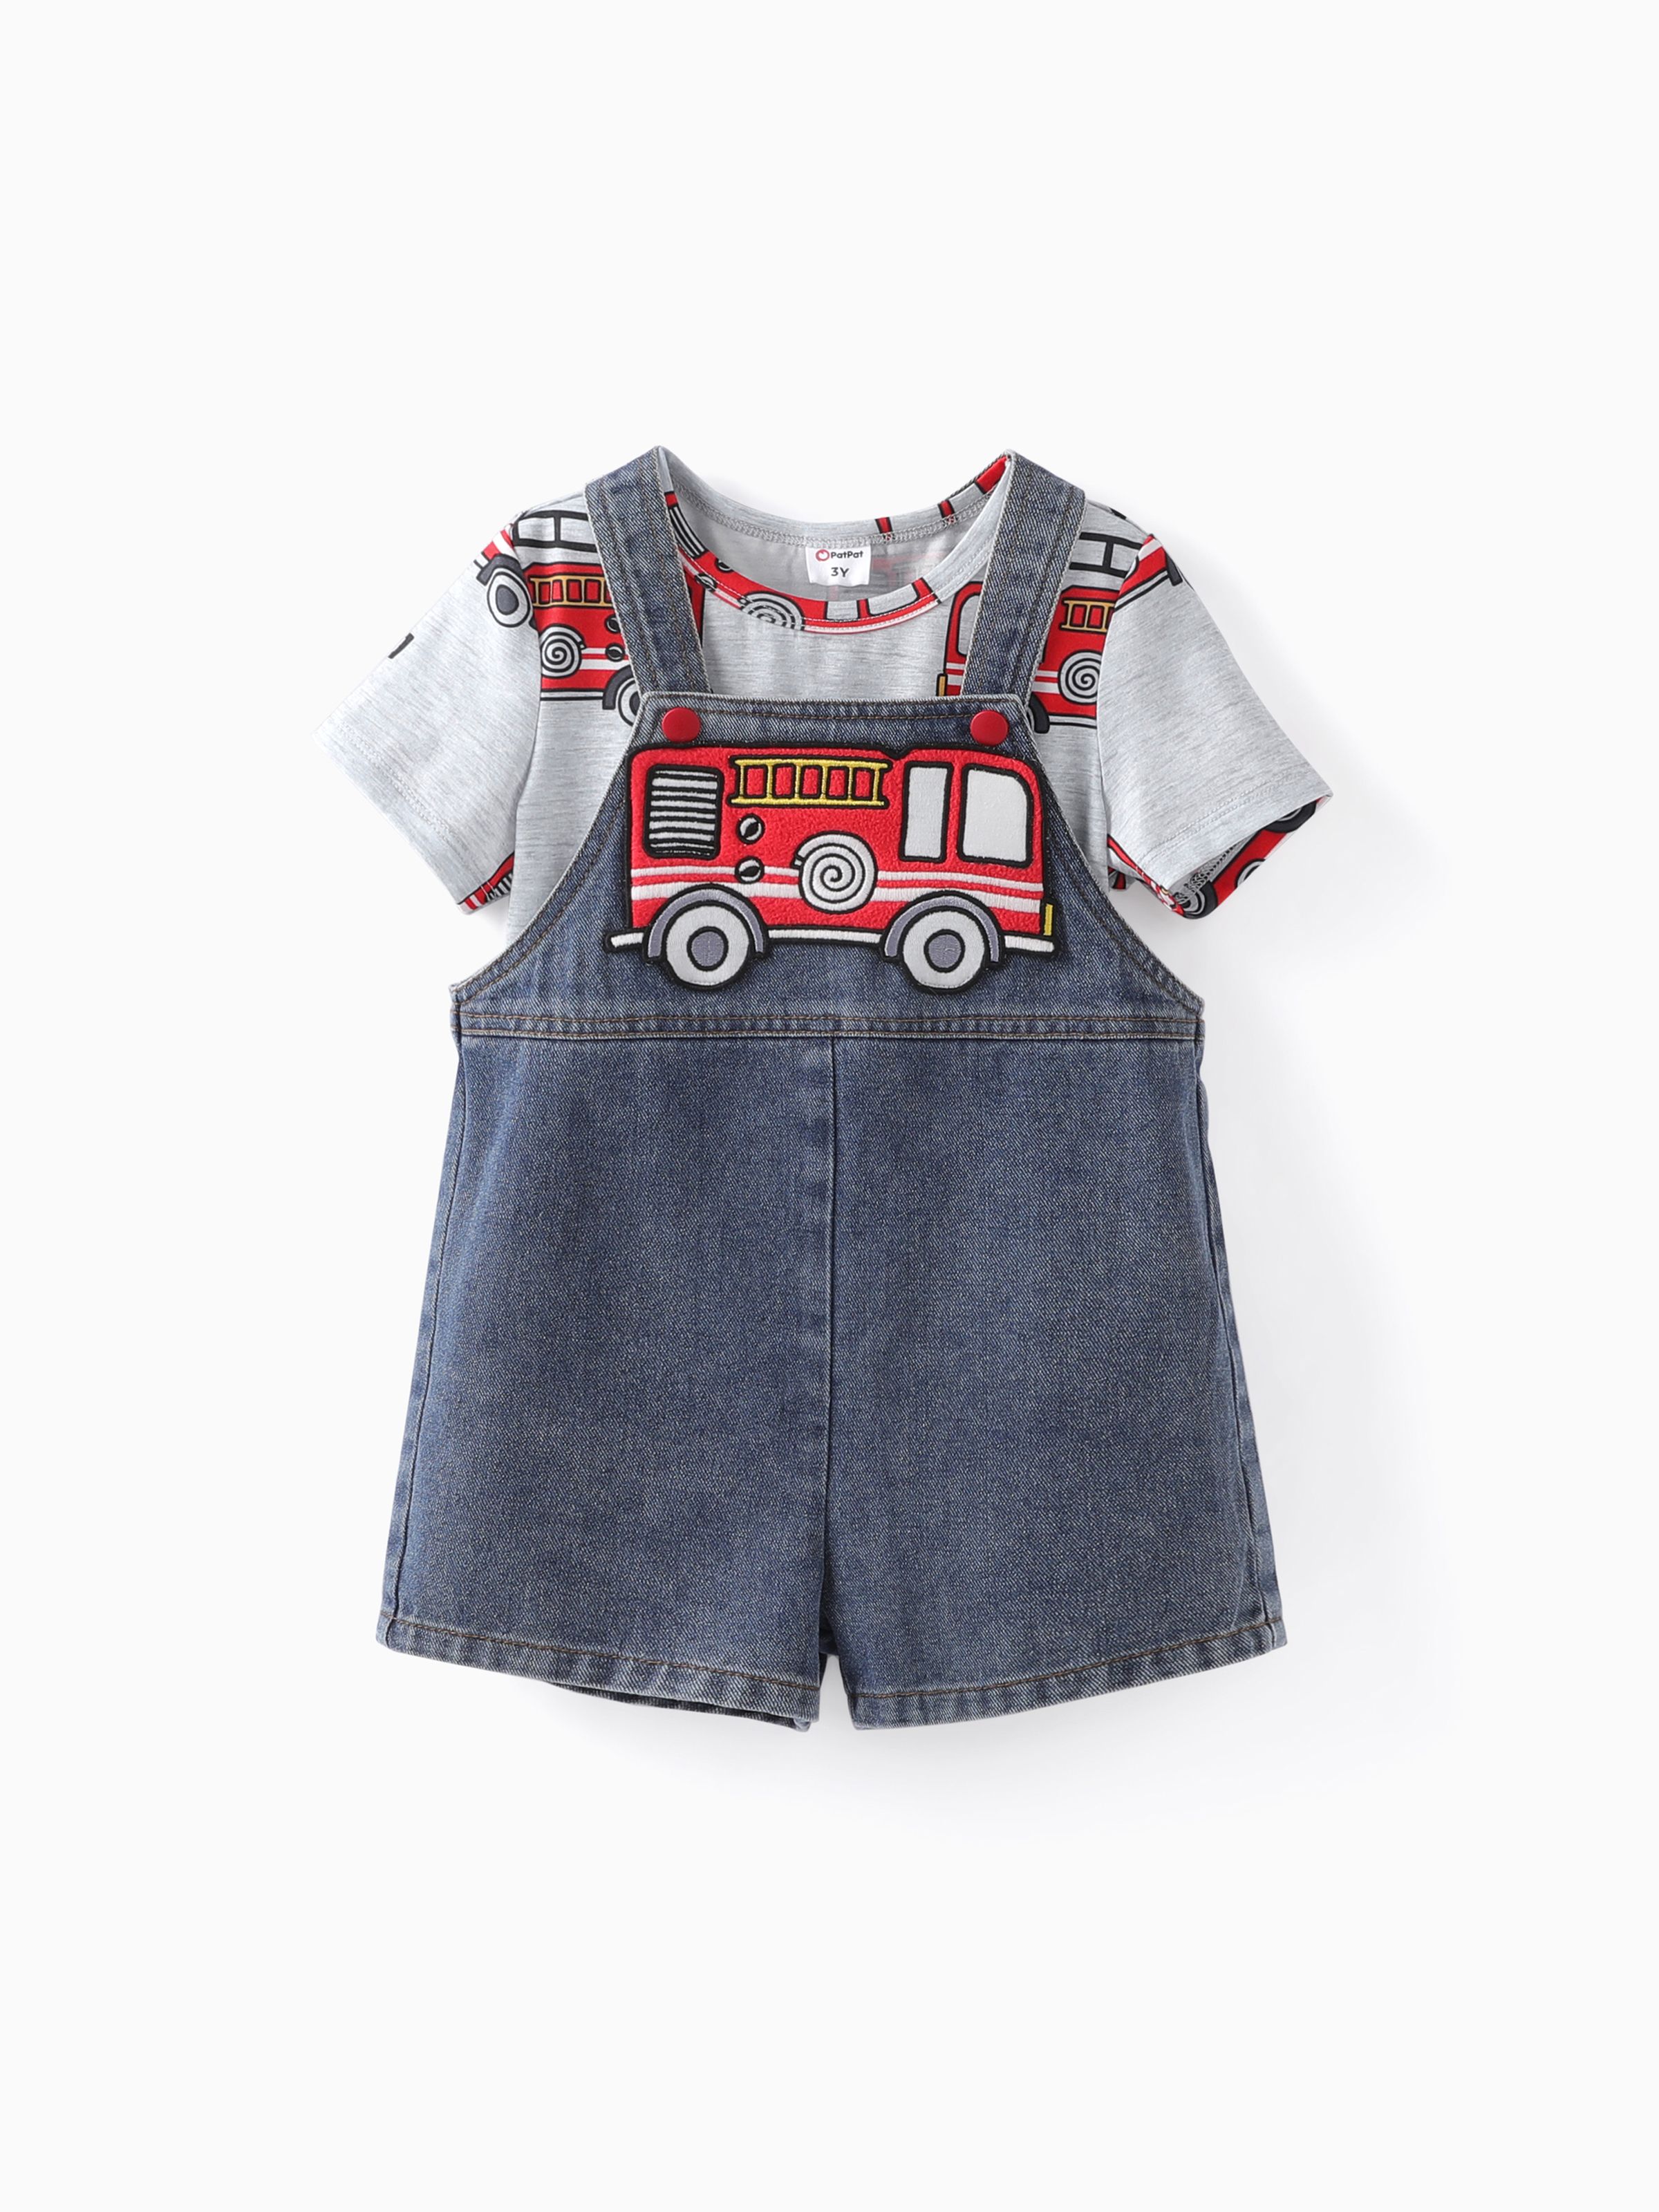 

Toddler Boys 2pcs Vehicle Print Tee and Vehicle Embroiderey Denim Overalls Set